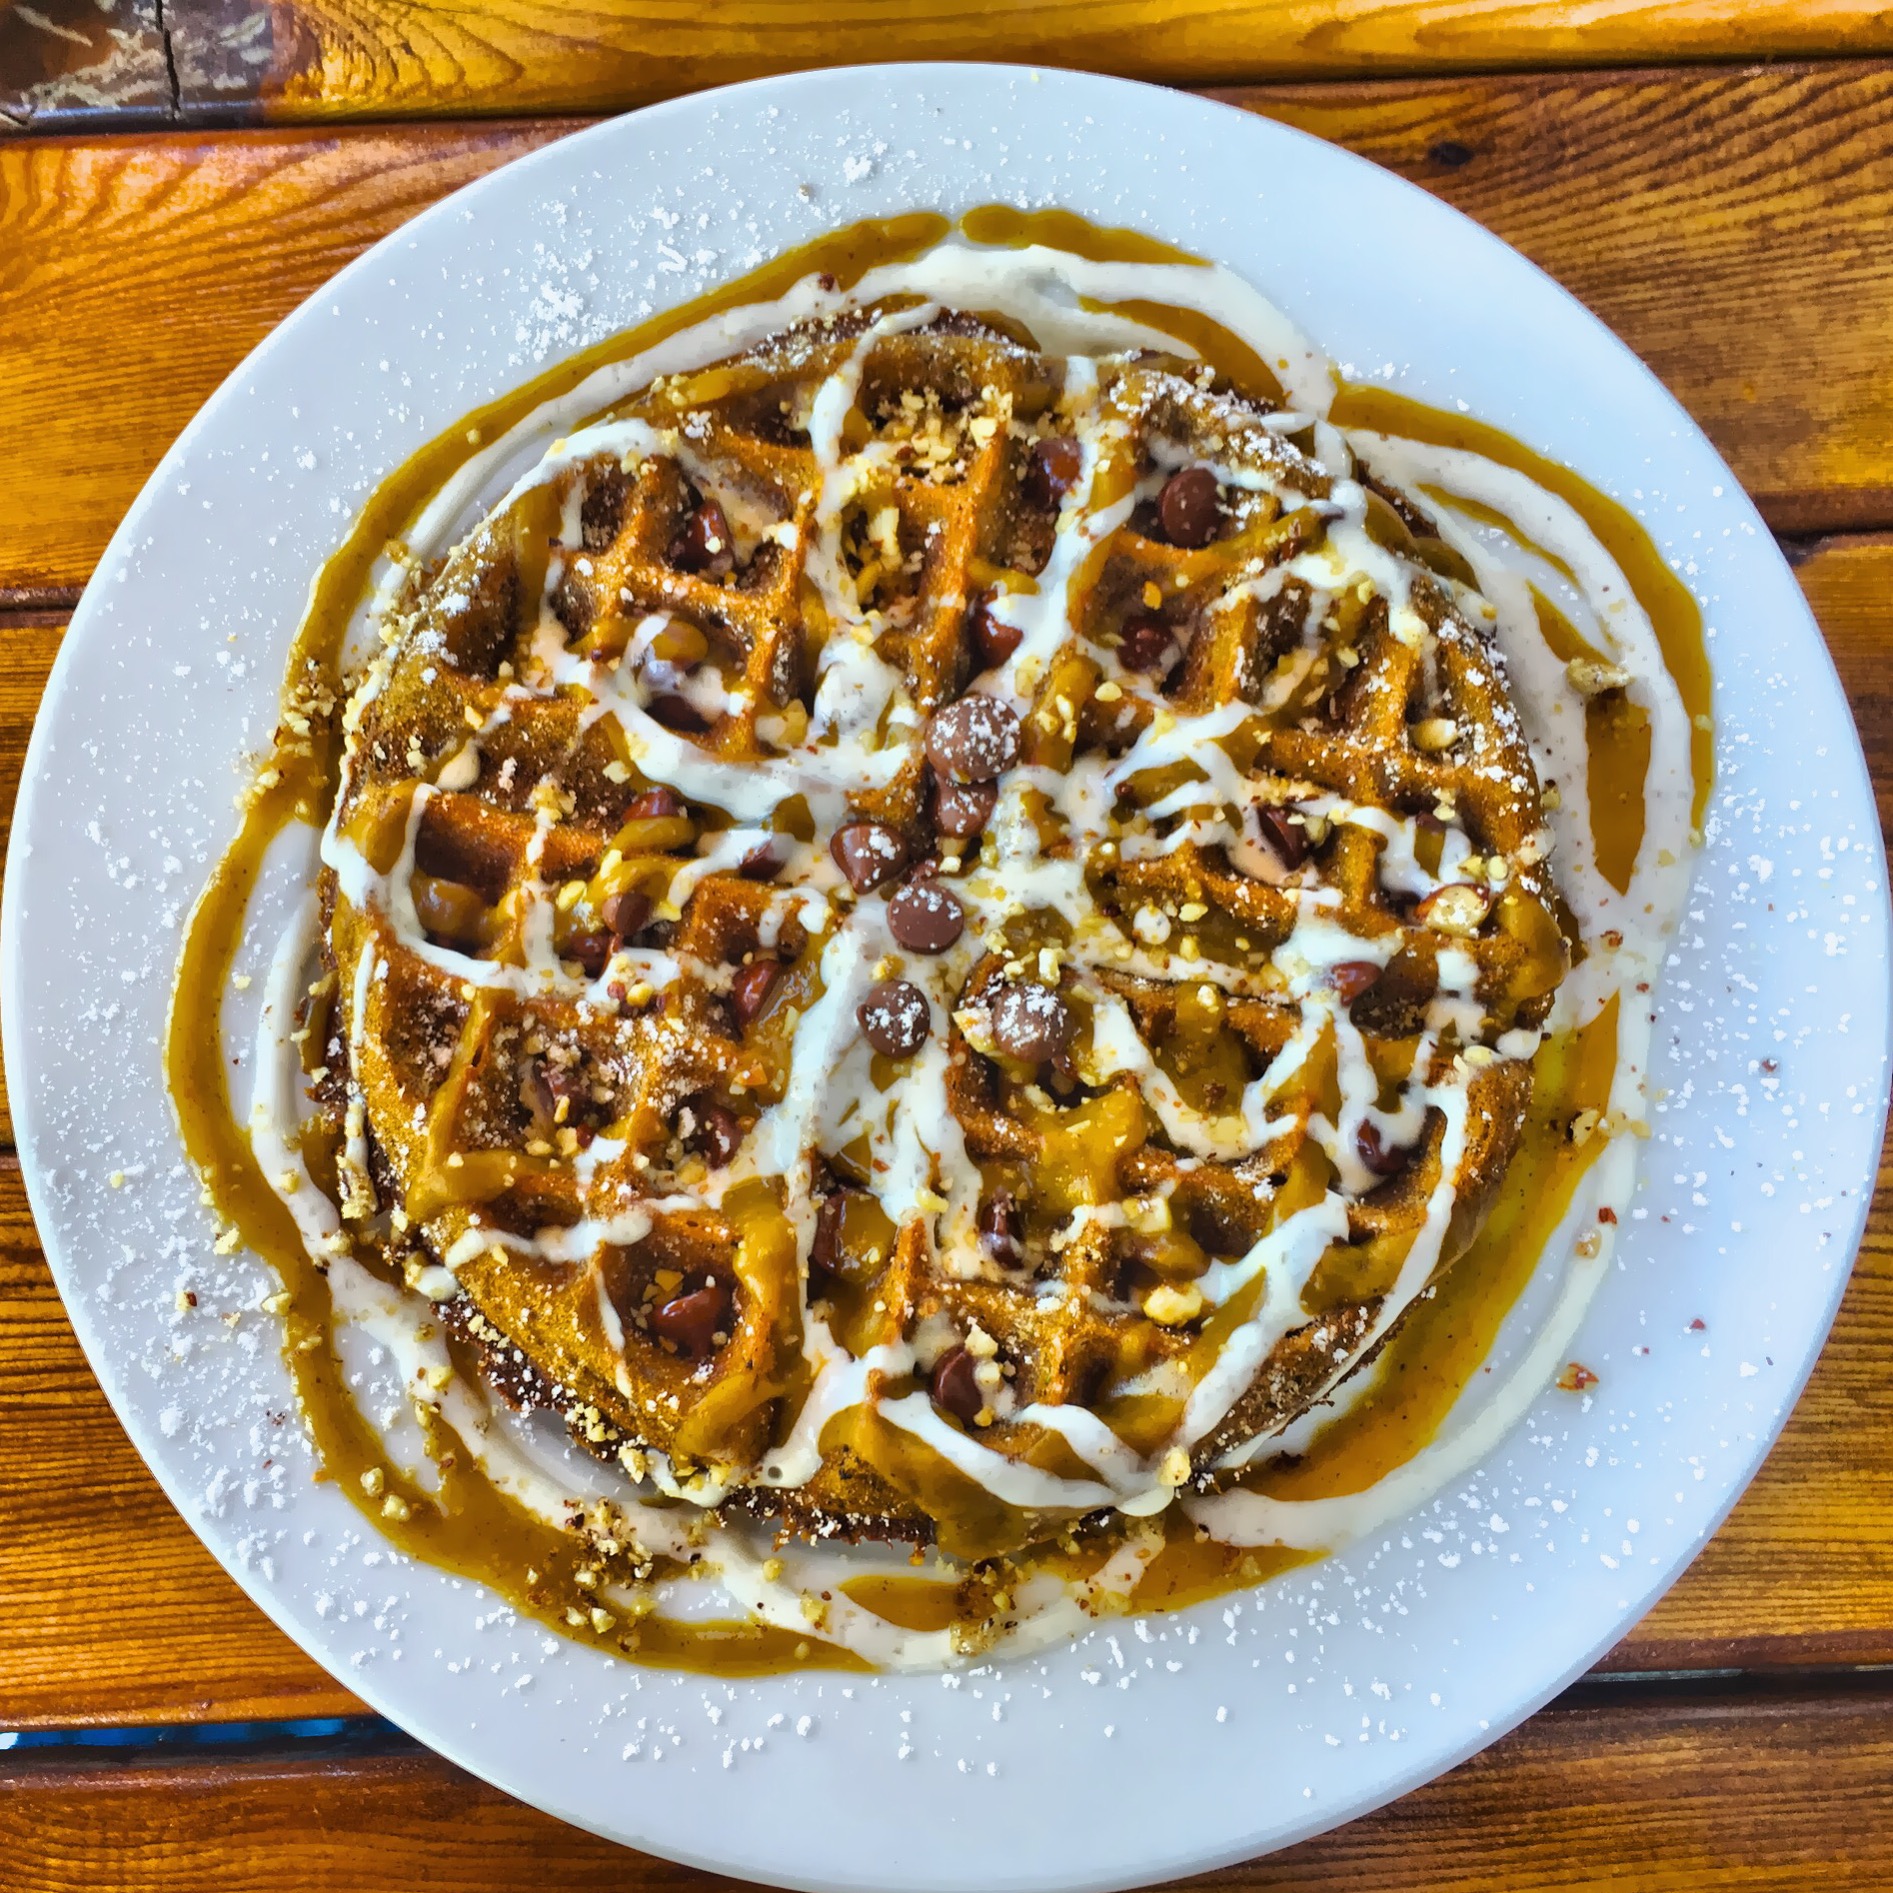 Pumpkin cheesecake waffle with hazelnuts and chocolate chips